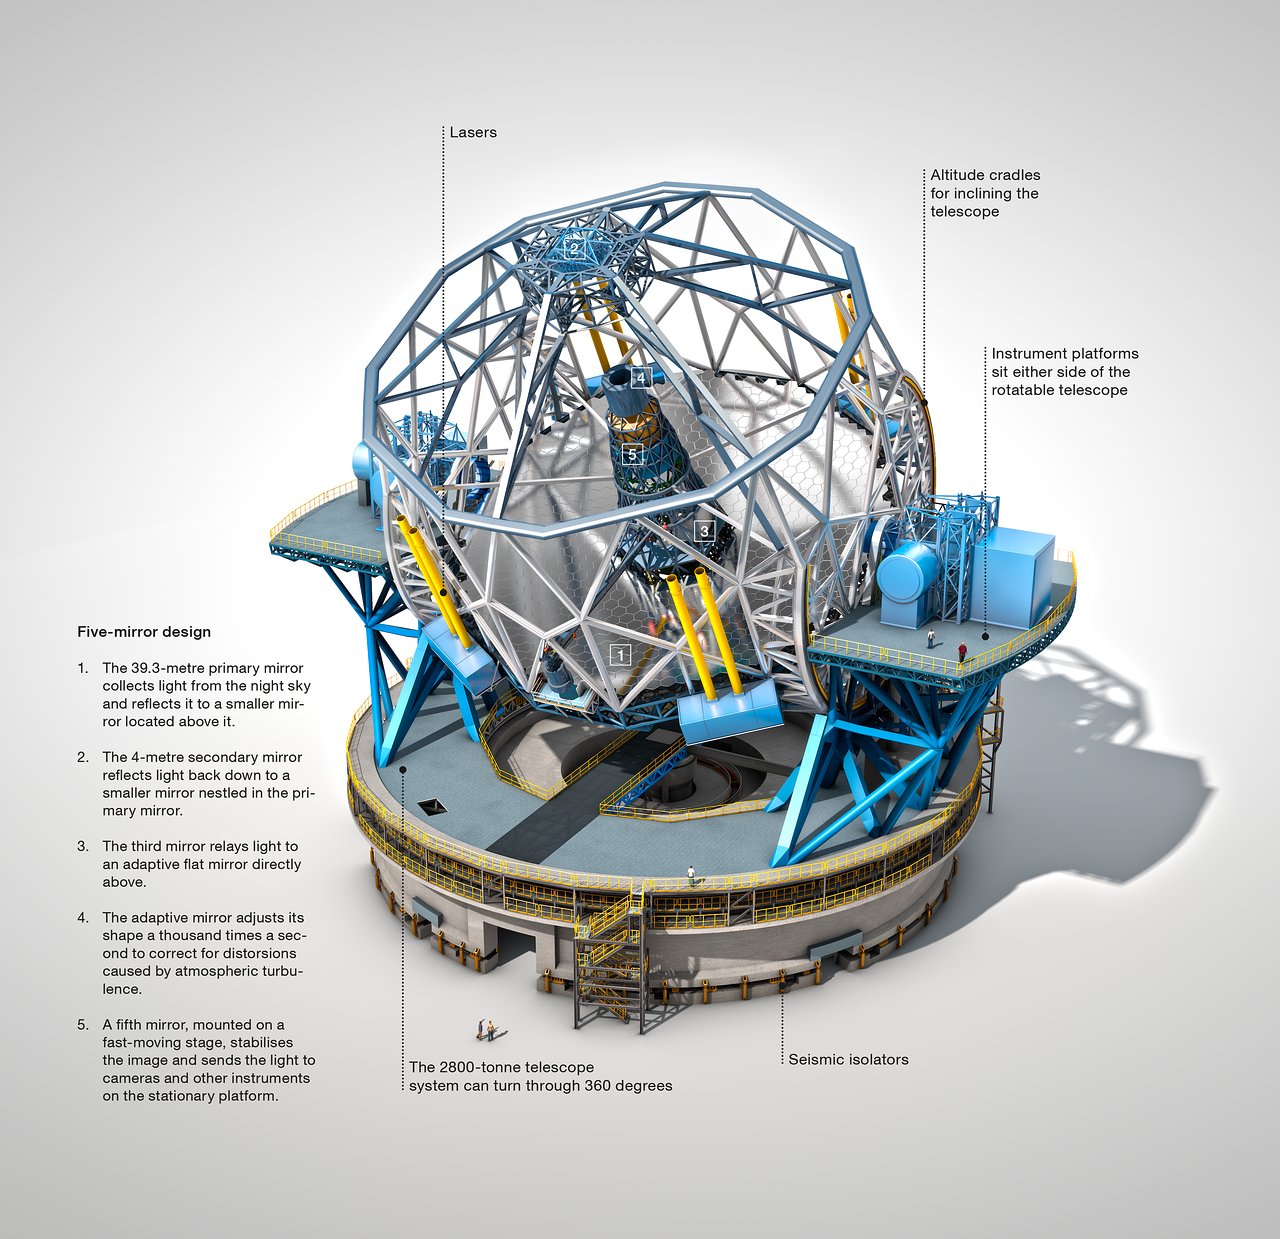 The Extremely Large Telescope (annotated)